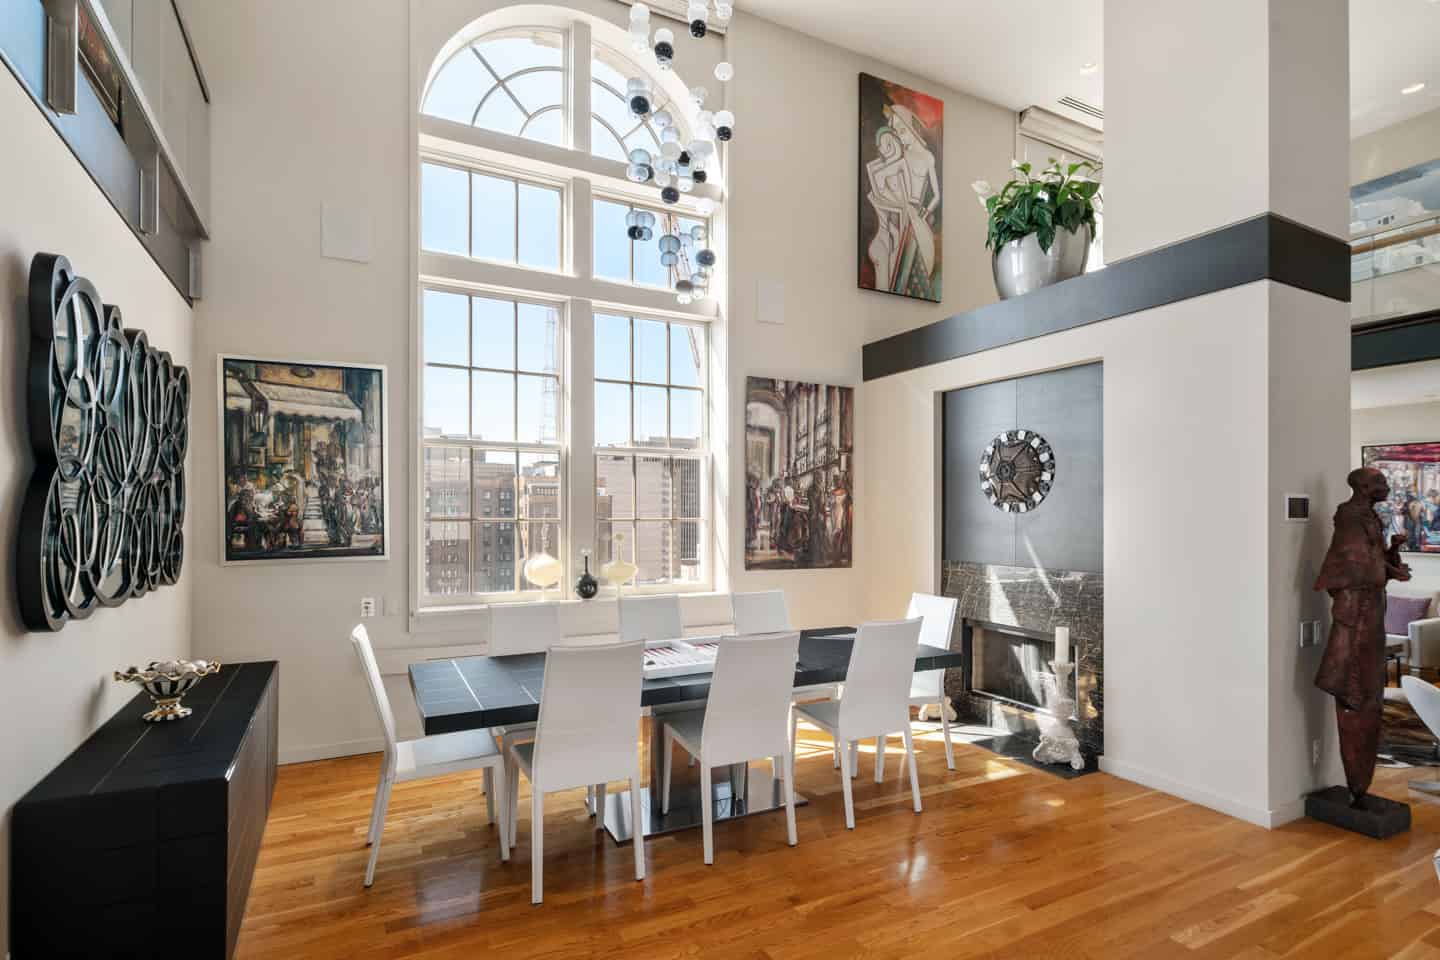 Real Estate Photographs of a Luxury Penthouse on Locust Street, in Philadelphia, PA